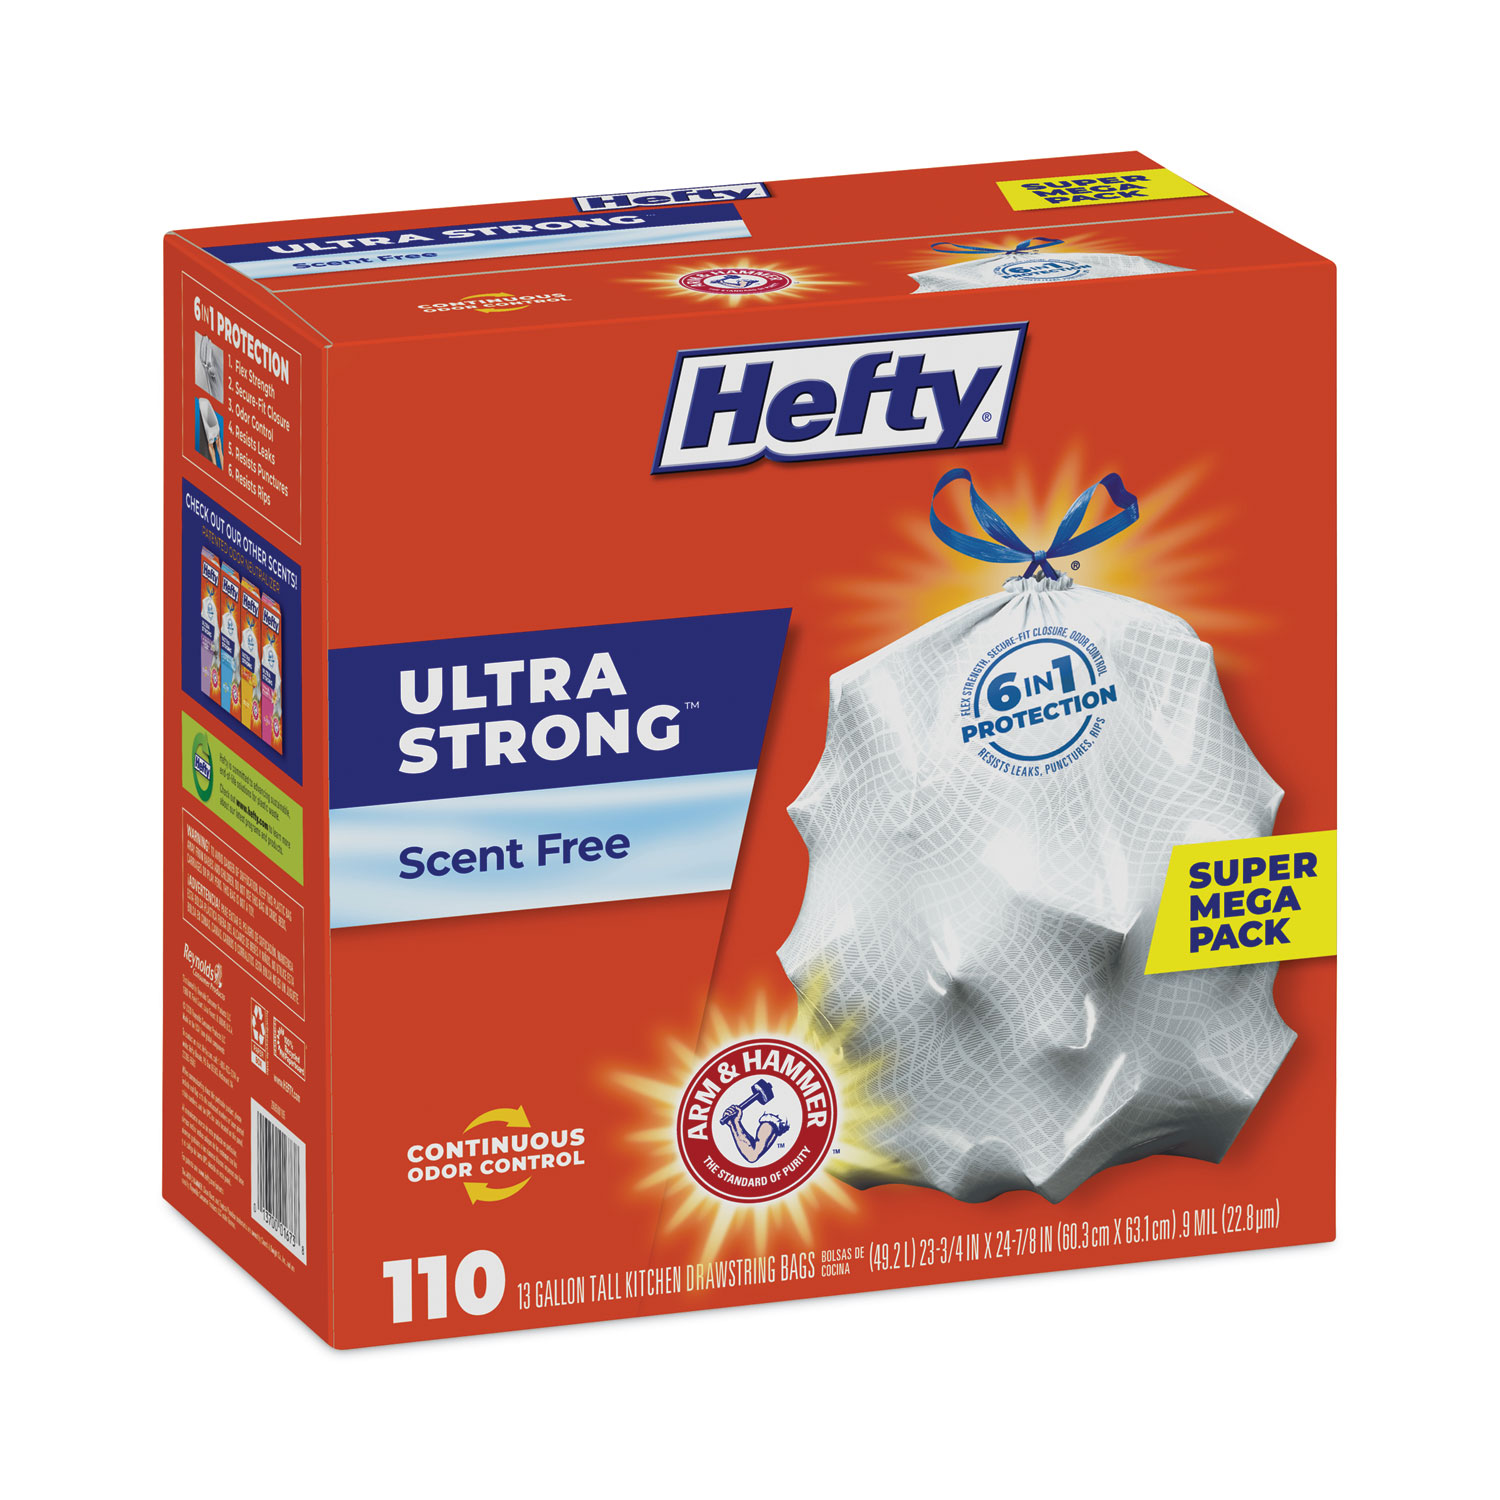 Hefty Ultra Strong Tall Kitchen Trash Bags, Blackout, Clean Burst, 13  Gallon, 80 Count